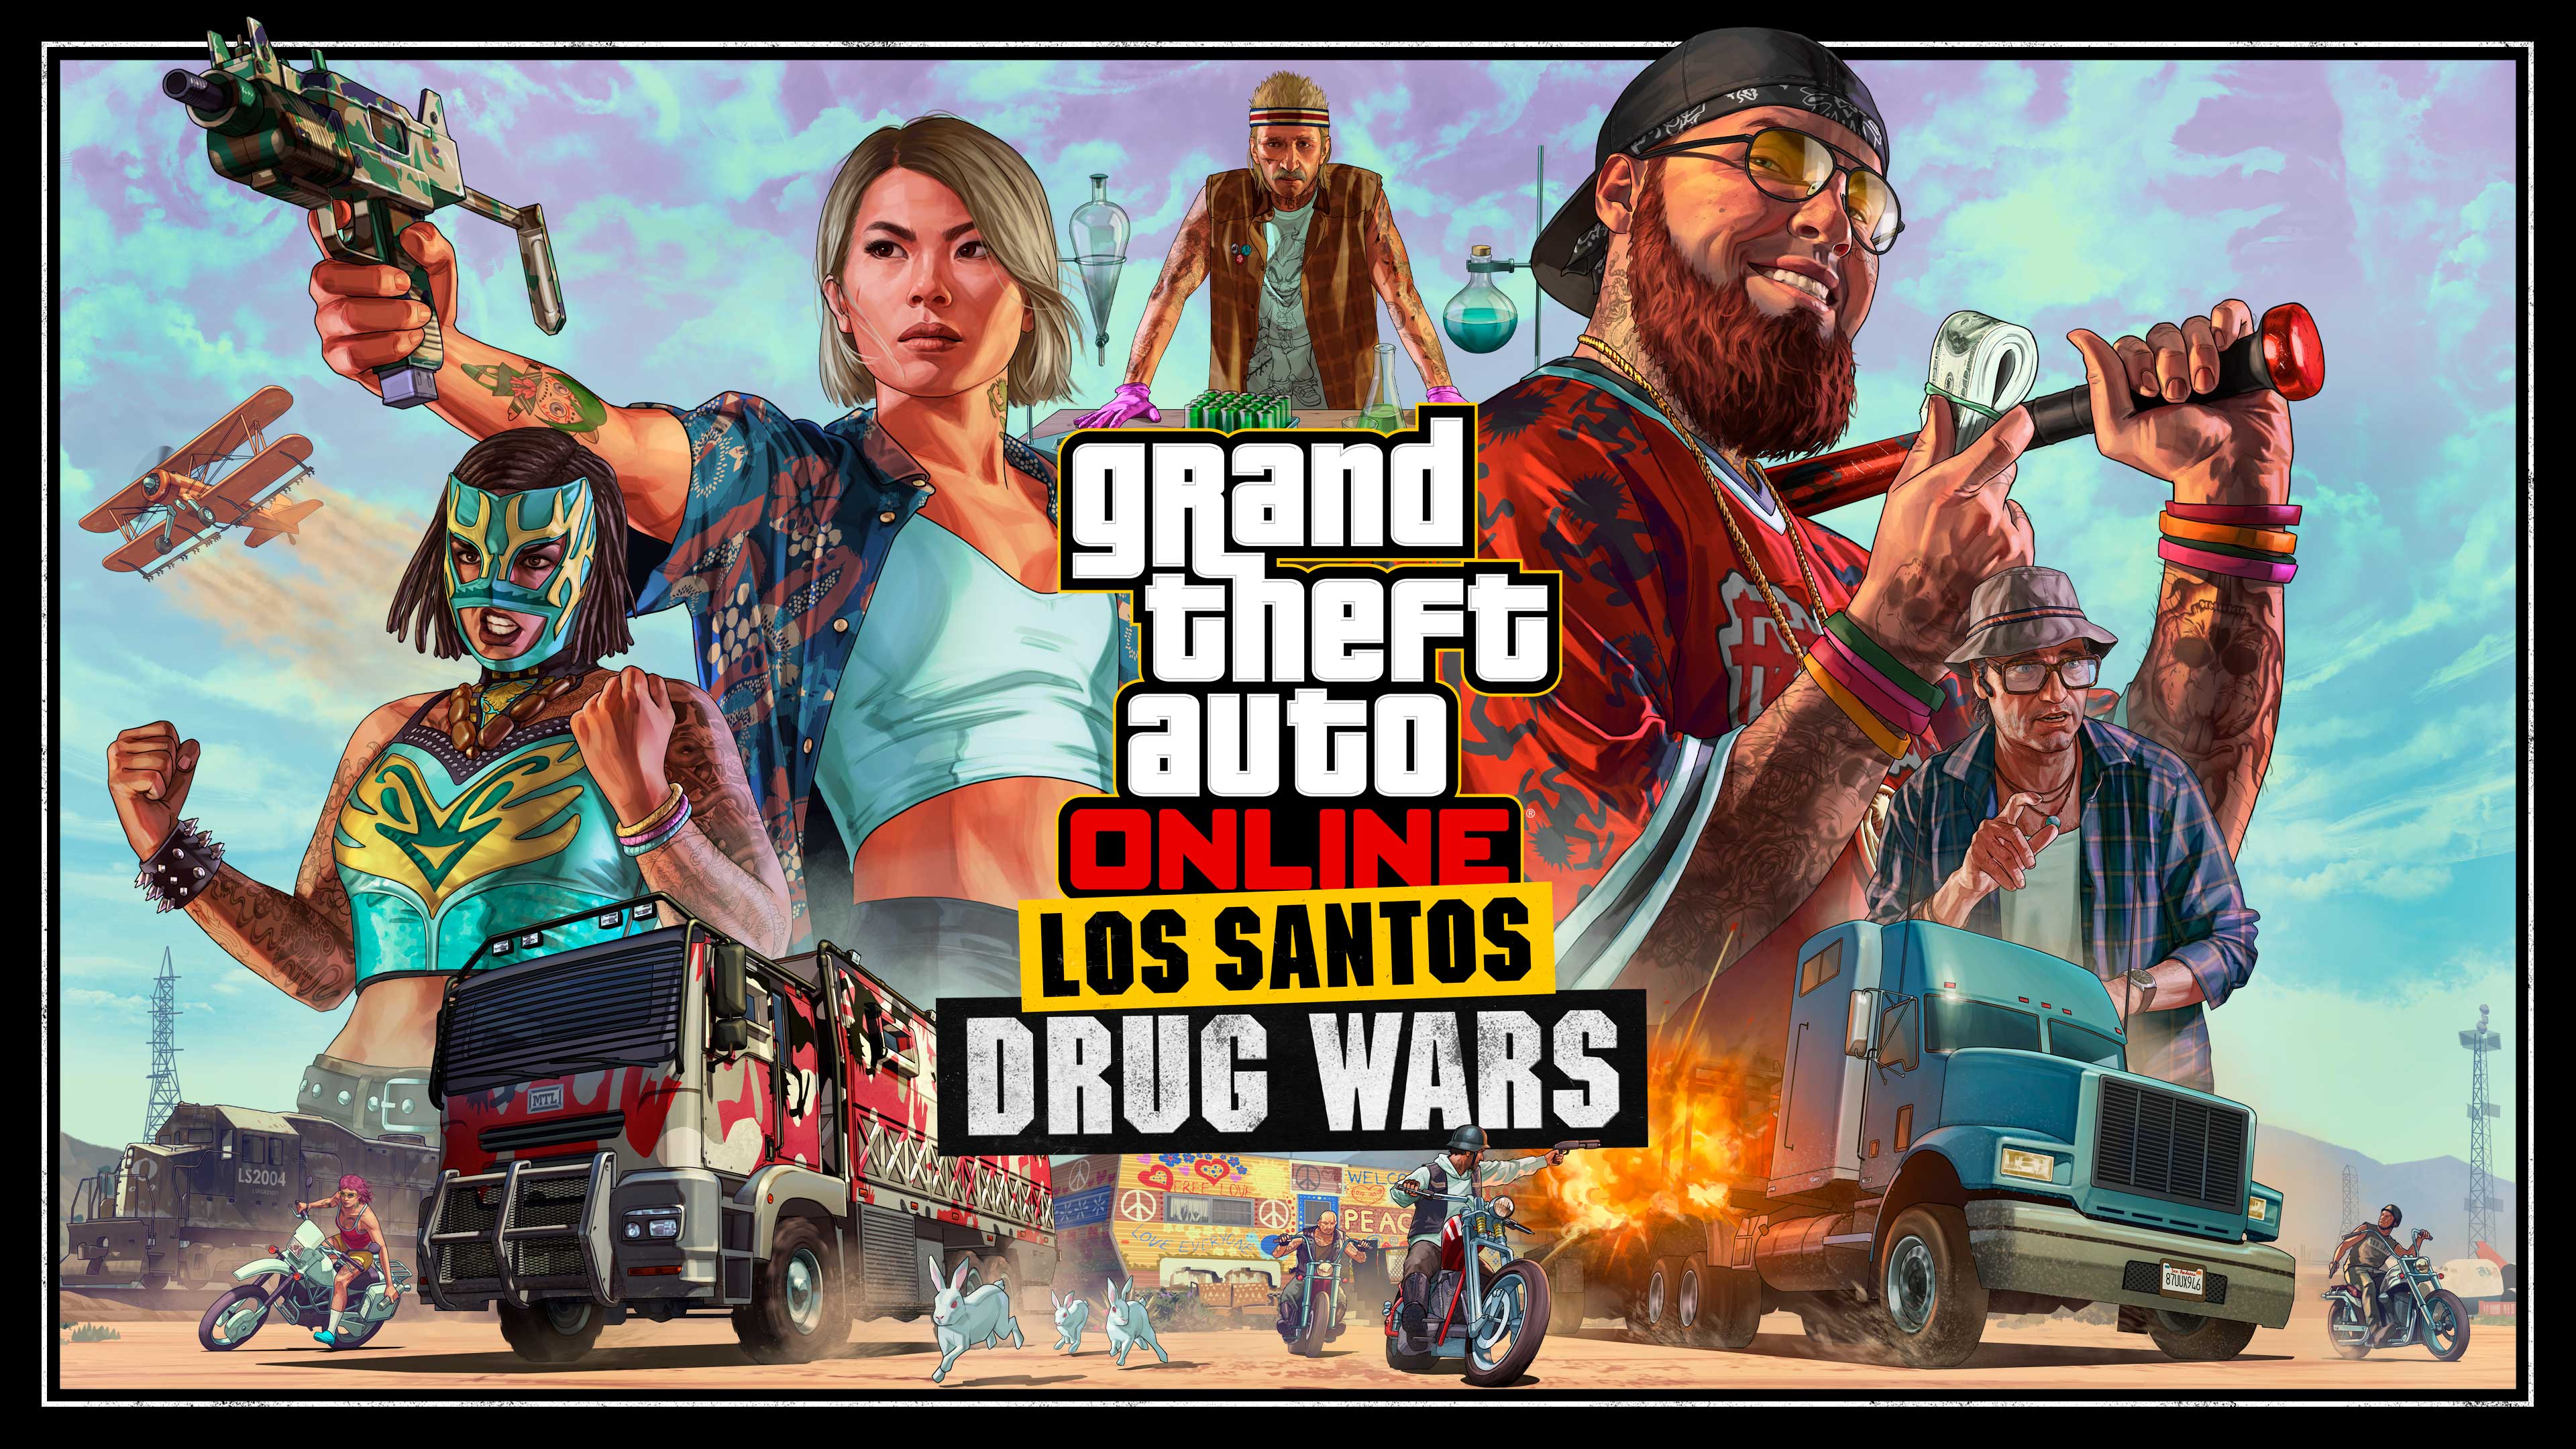 Rockstar Games on X: Grand Theft Auto V and GTA Online coming March 15 for  PlayStation® 5. Get GTA Online for FREE exclusively on PS5. Pre-load now  and be ready to play